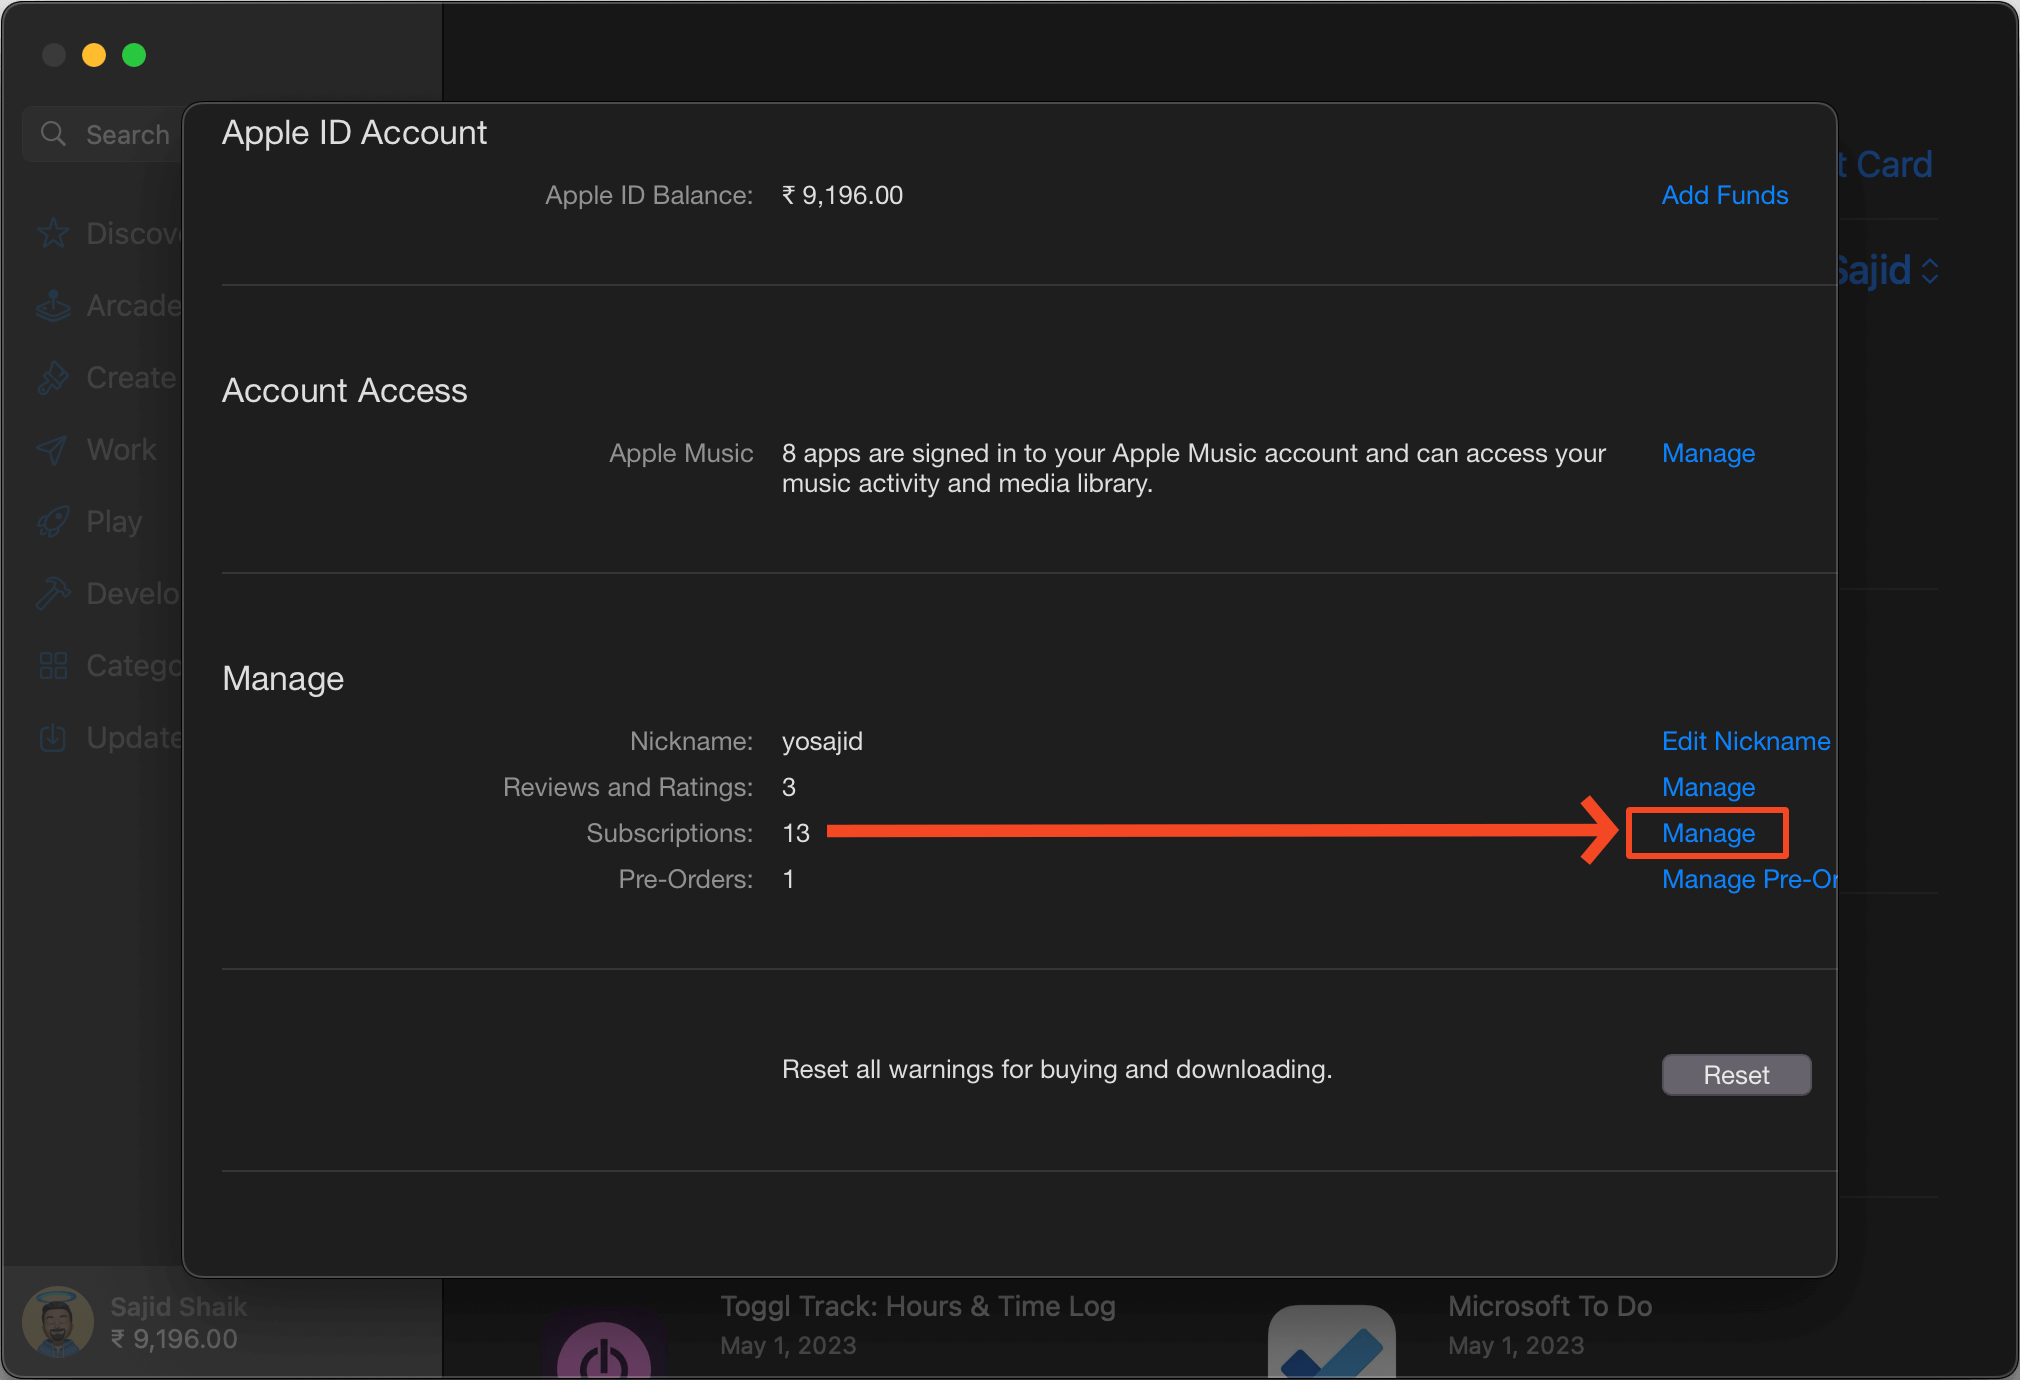 Click Manage next to Subscription under the Manage section